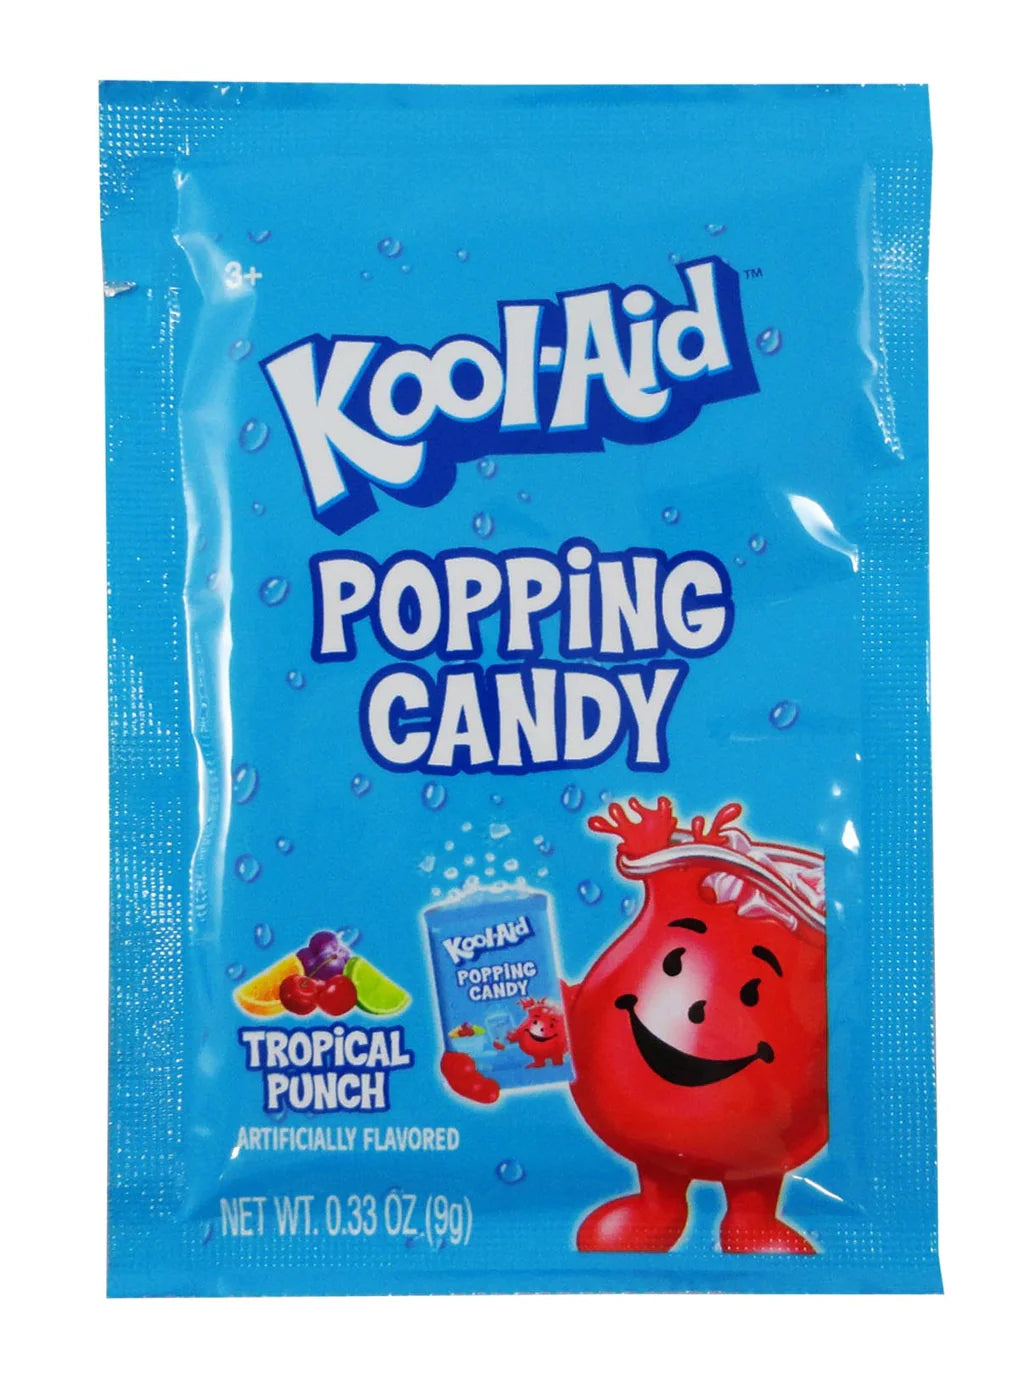 Kool aid popping candy